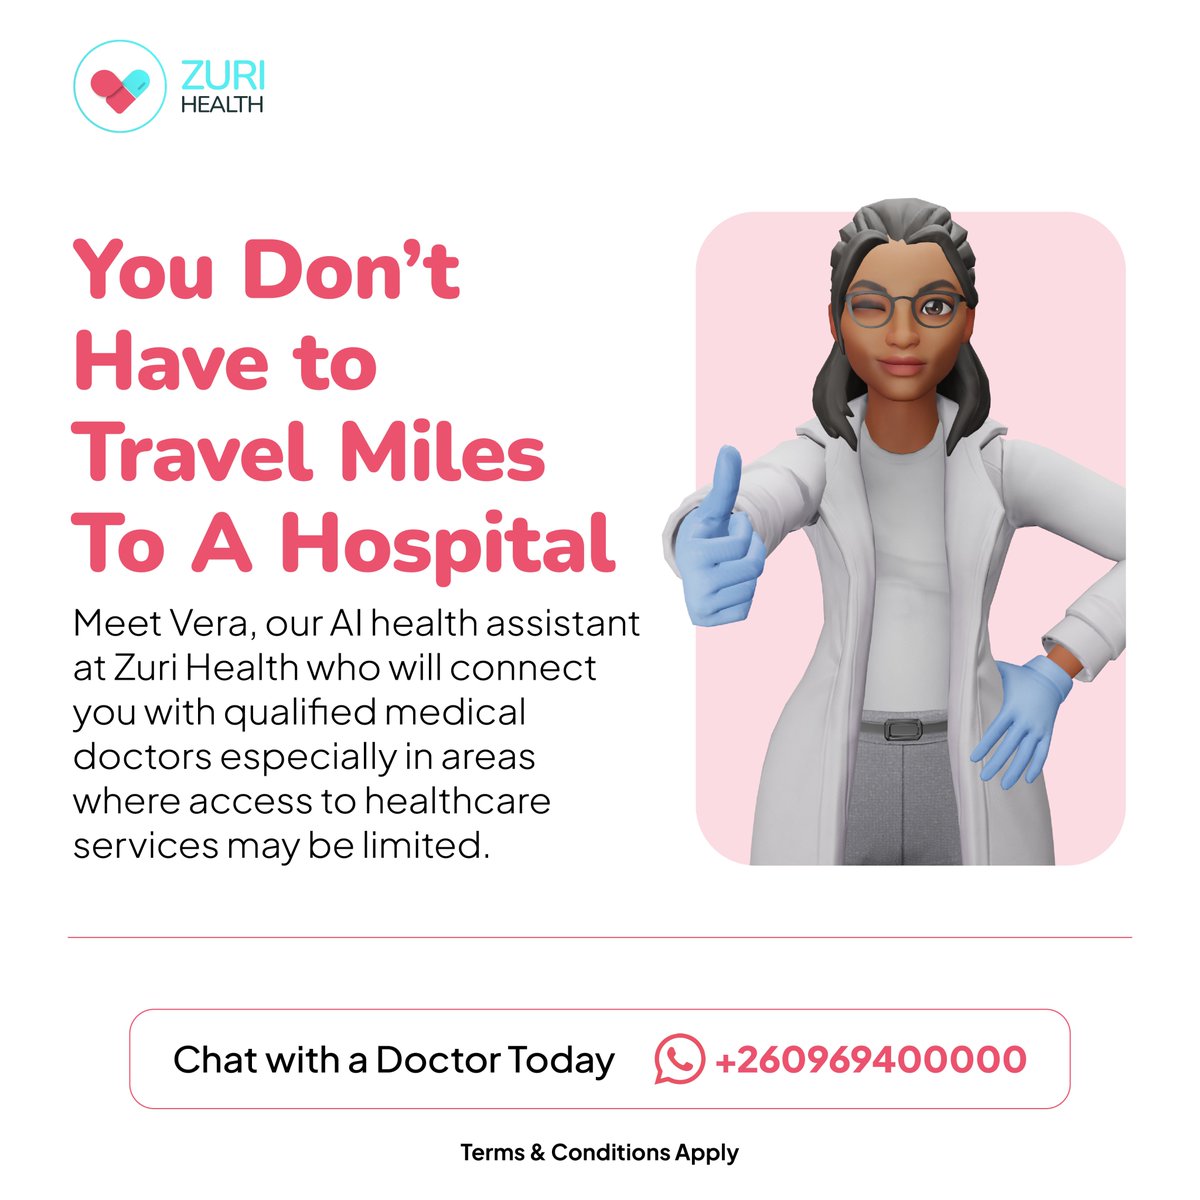 With Zuri Health, you don’t have to travel miles to consult a doctor. Meet Vera, our AI health assistant that bridges the gap between you and qualified medical professionals right through your smartphone! 📲

👩‍⚕️👨‍⚕️ Chat with a Doctor Today: +260969400000
#ZuriHealth #WhatsApp